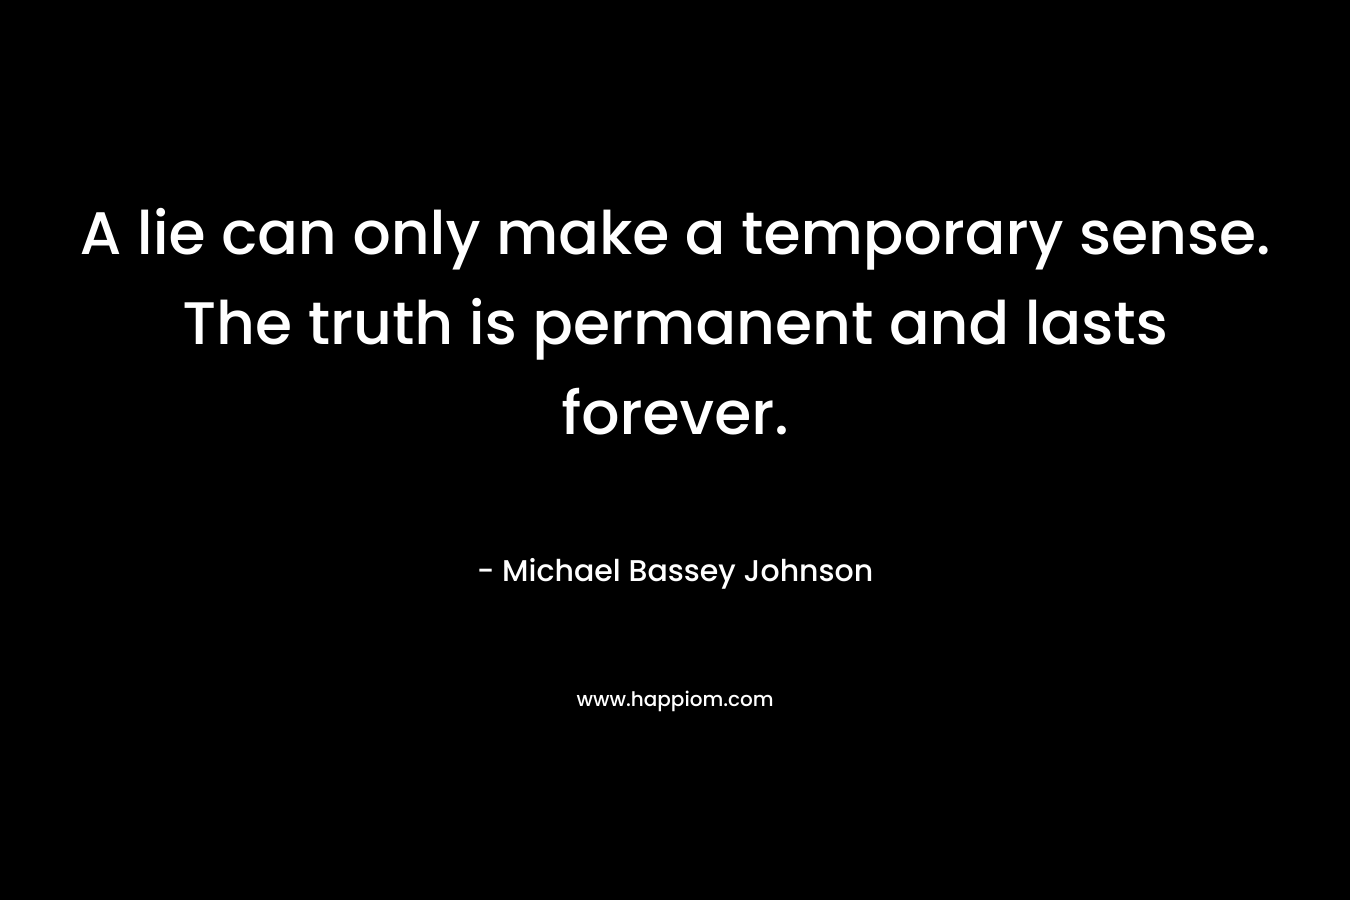 A lie can only make a temporary sense. The truth is permanent and lasts forever.